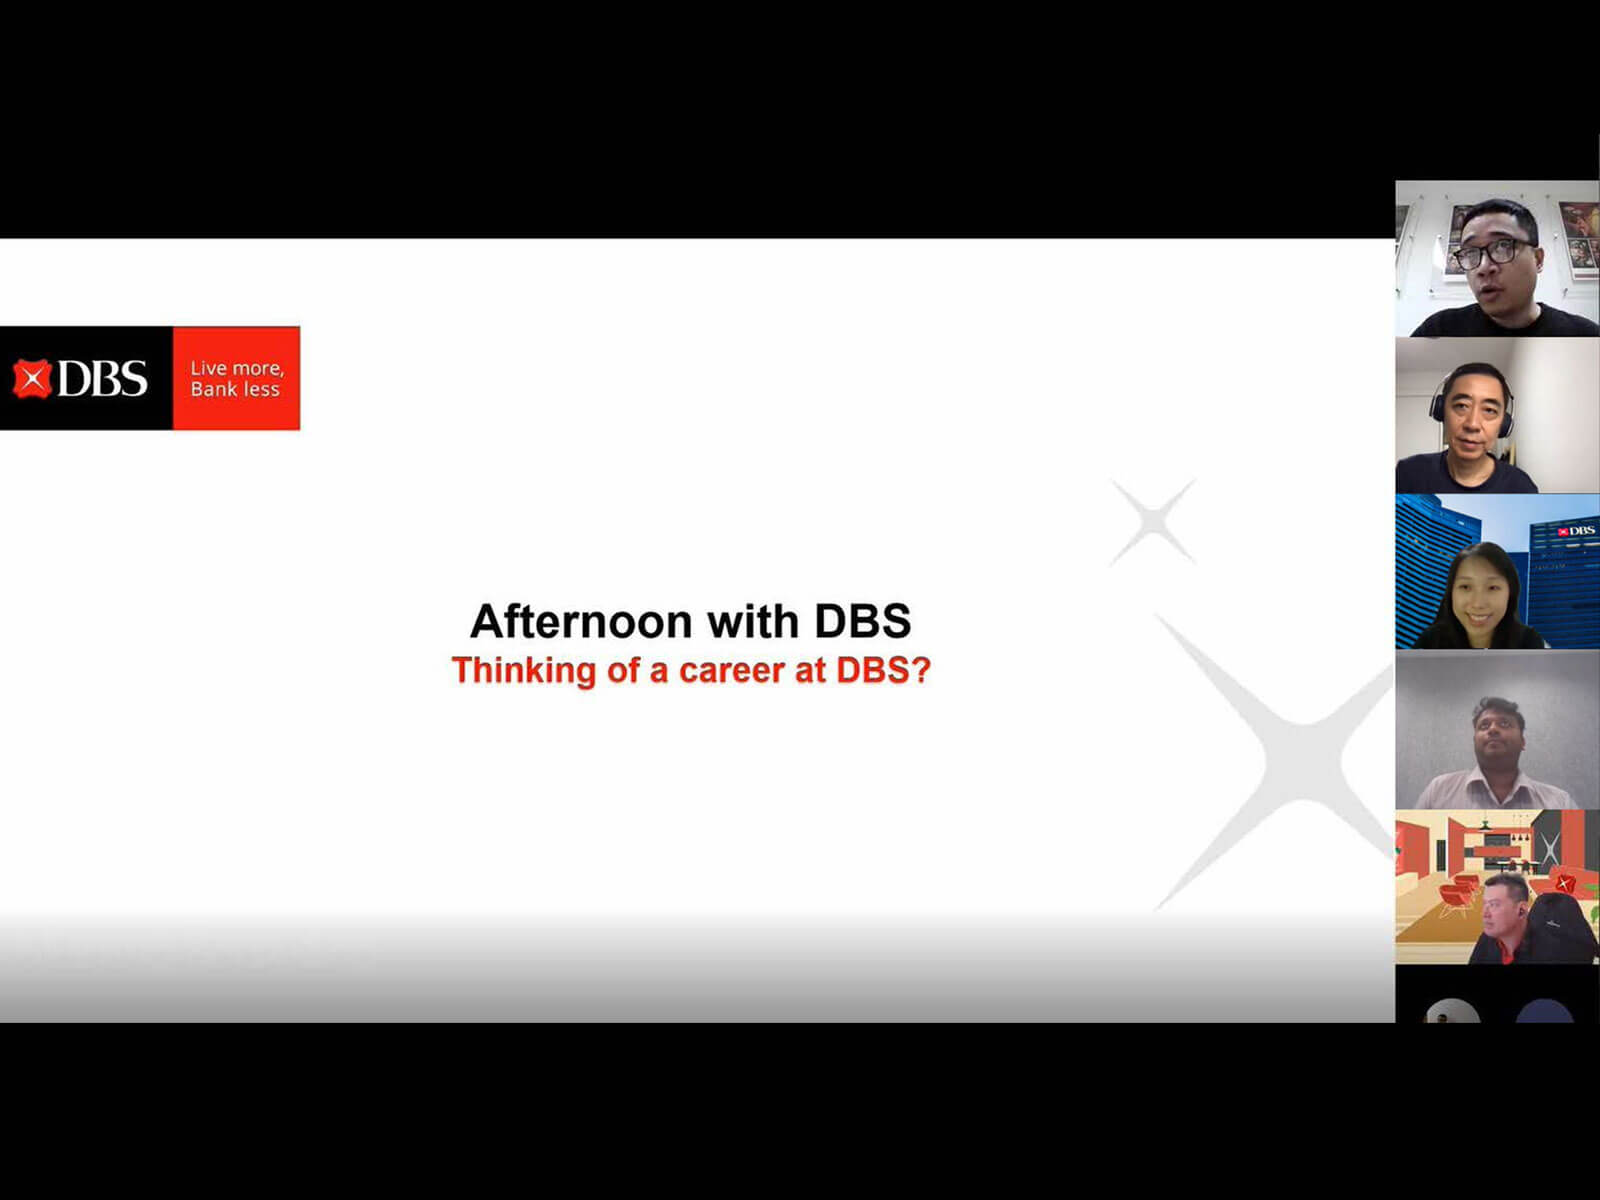 Slide of DBS company logo with images of meeting attendees to the right.